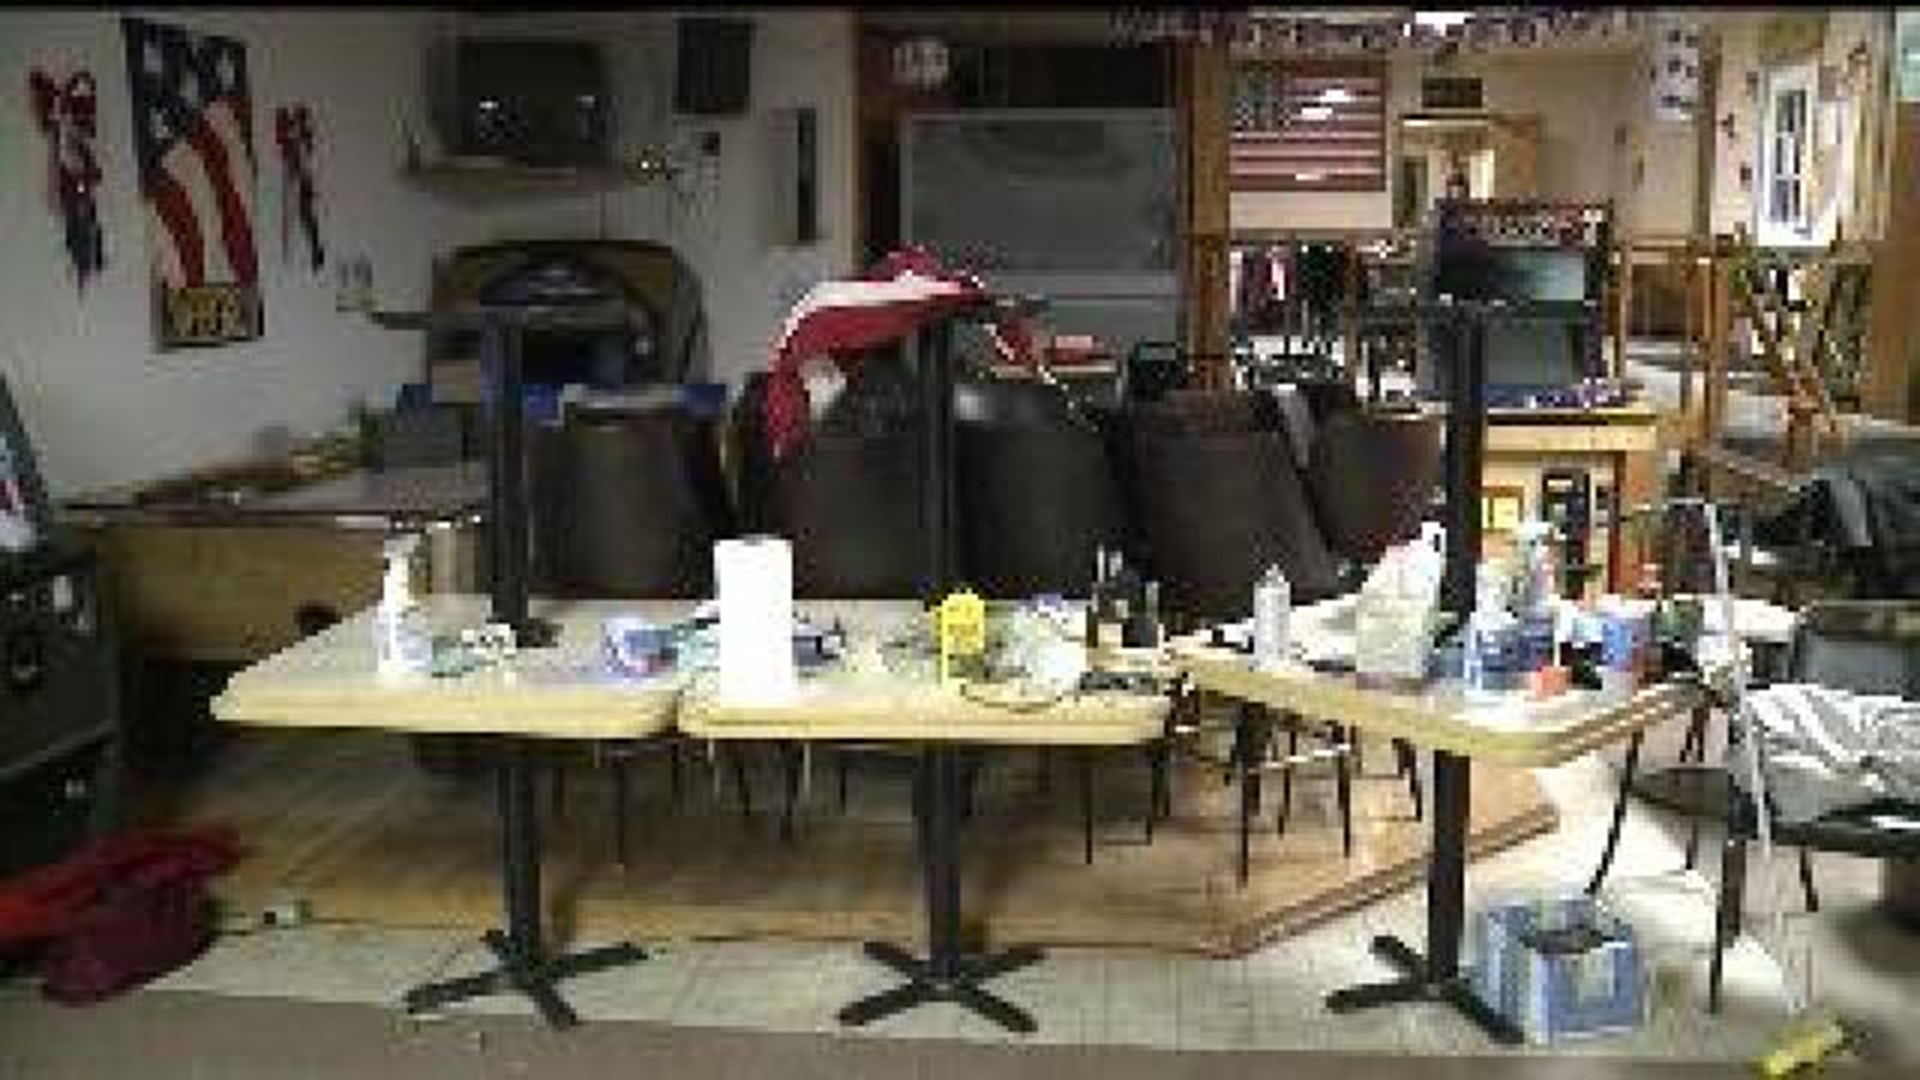 Bettendorf VFW to reopen after ceiling collapse